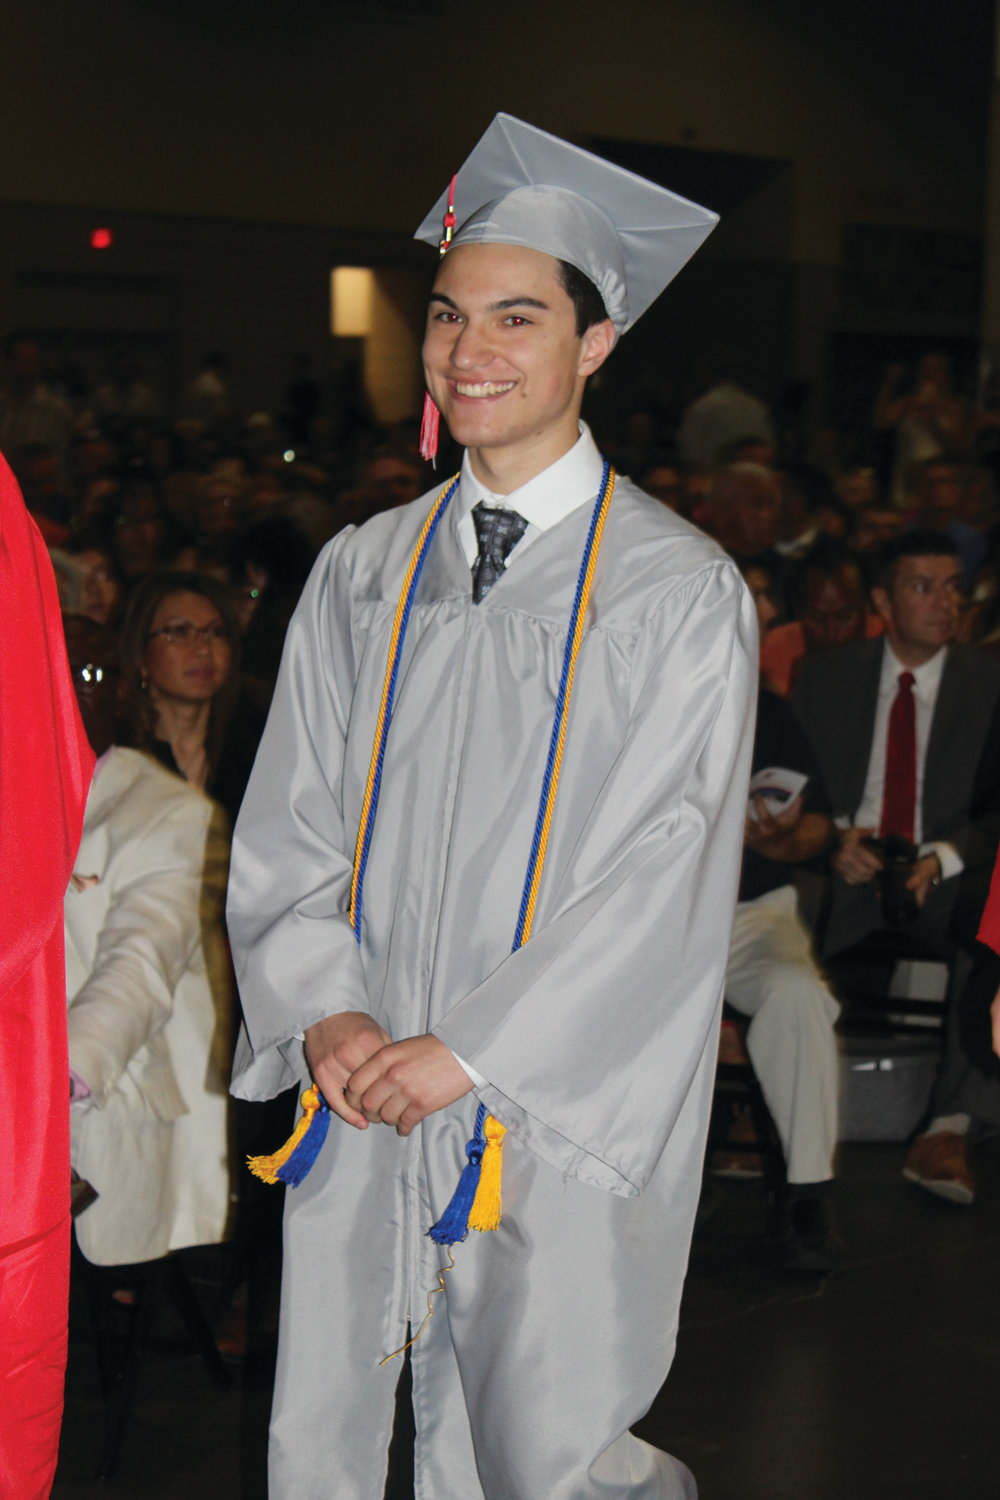 THE BIG MOMENT: Senior Alexander Vose heads to the stage for his diploma on Saturday. He will be attending the University of Rhode Island’s College of Pharmacy.